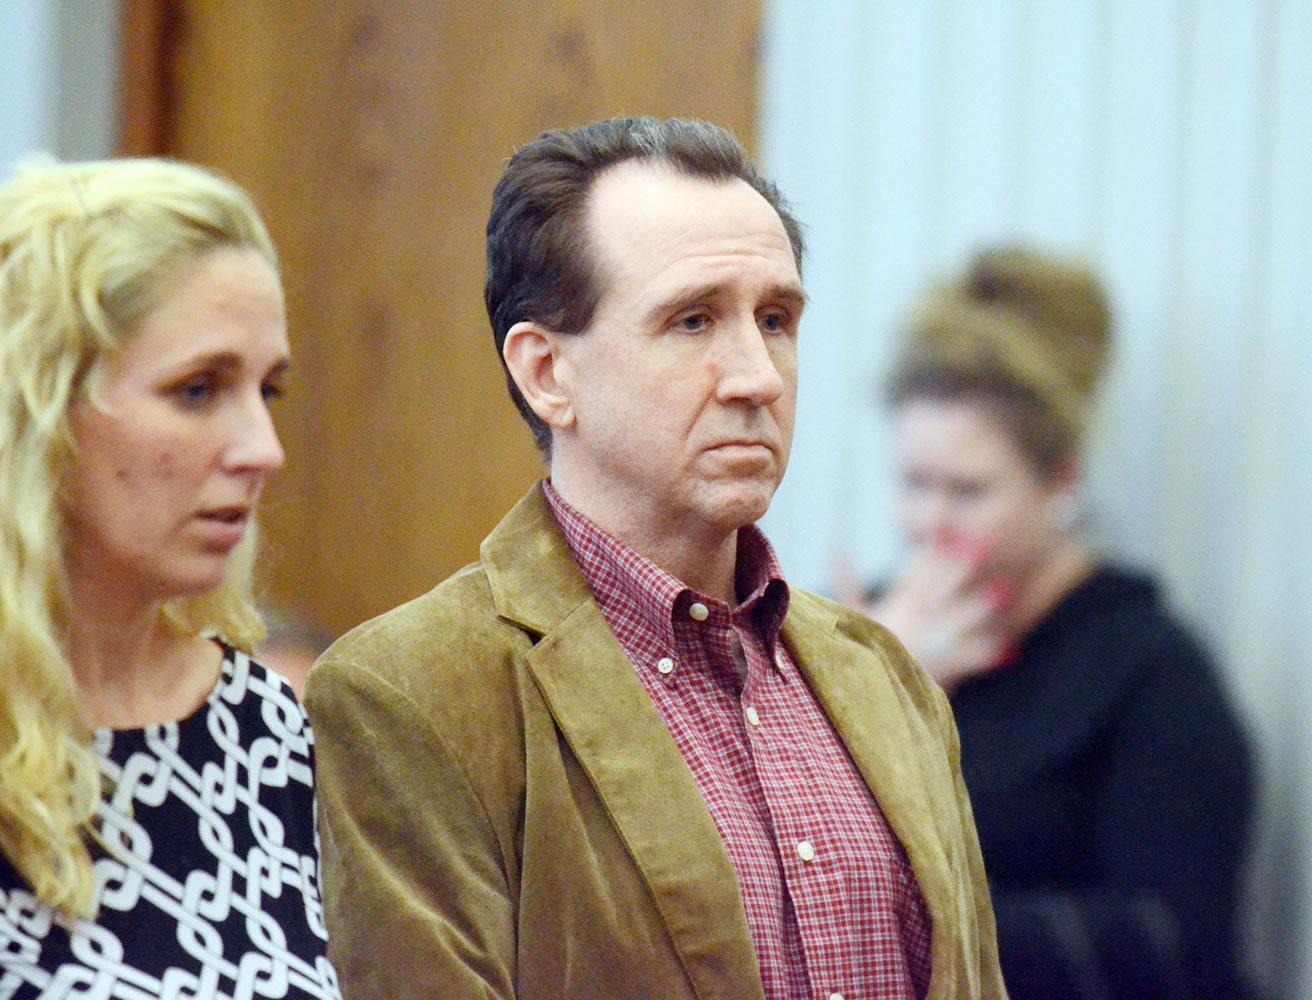 Larry Williams reacts as he is found guilty of manslaughter in the death of his adopted daughter, Hana, on Monday.